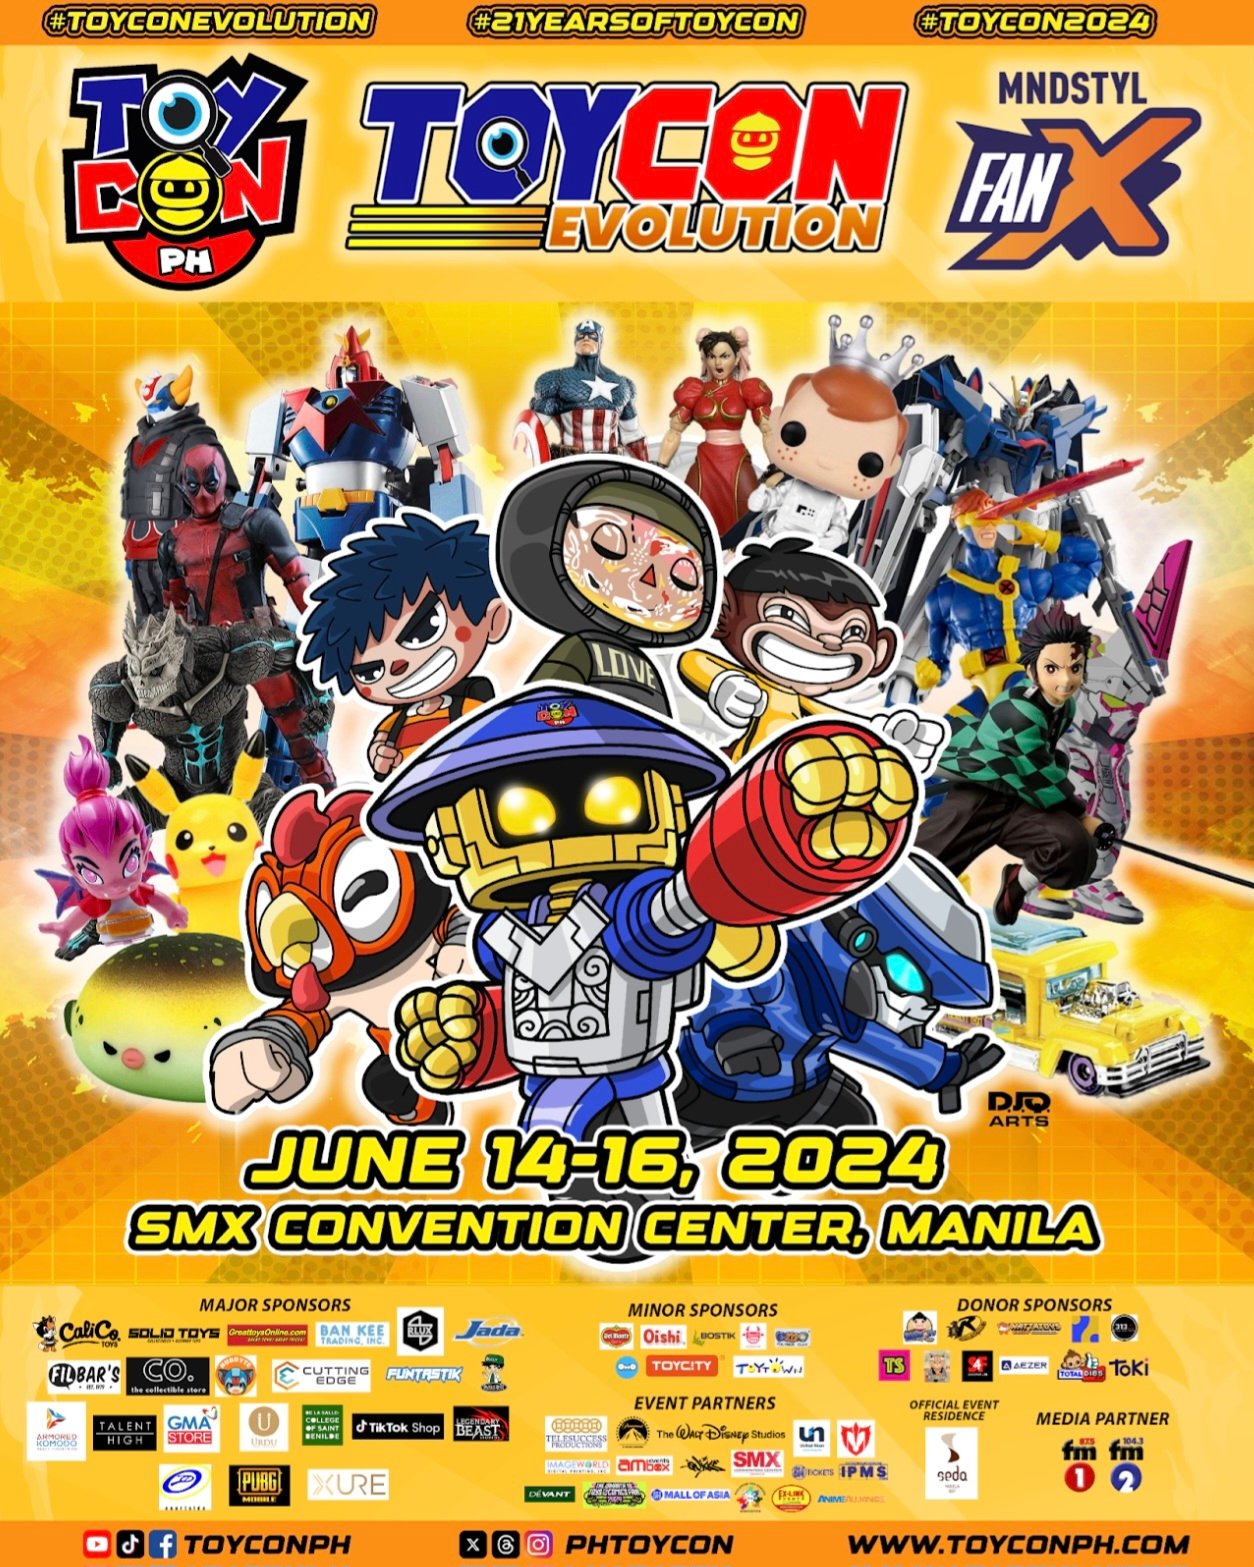 TOYCON MNDSTYL FANX The Evolution Celebrating the Transformation of Toys Collectibles and Creative Play TOYCON 2024